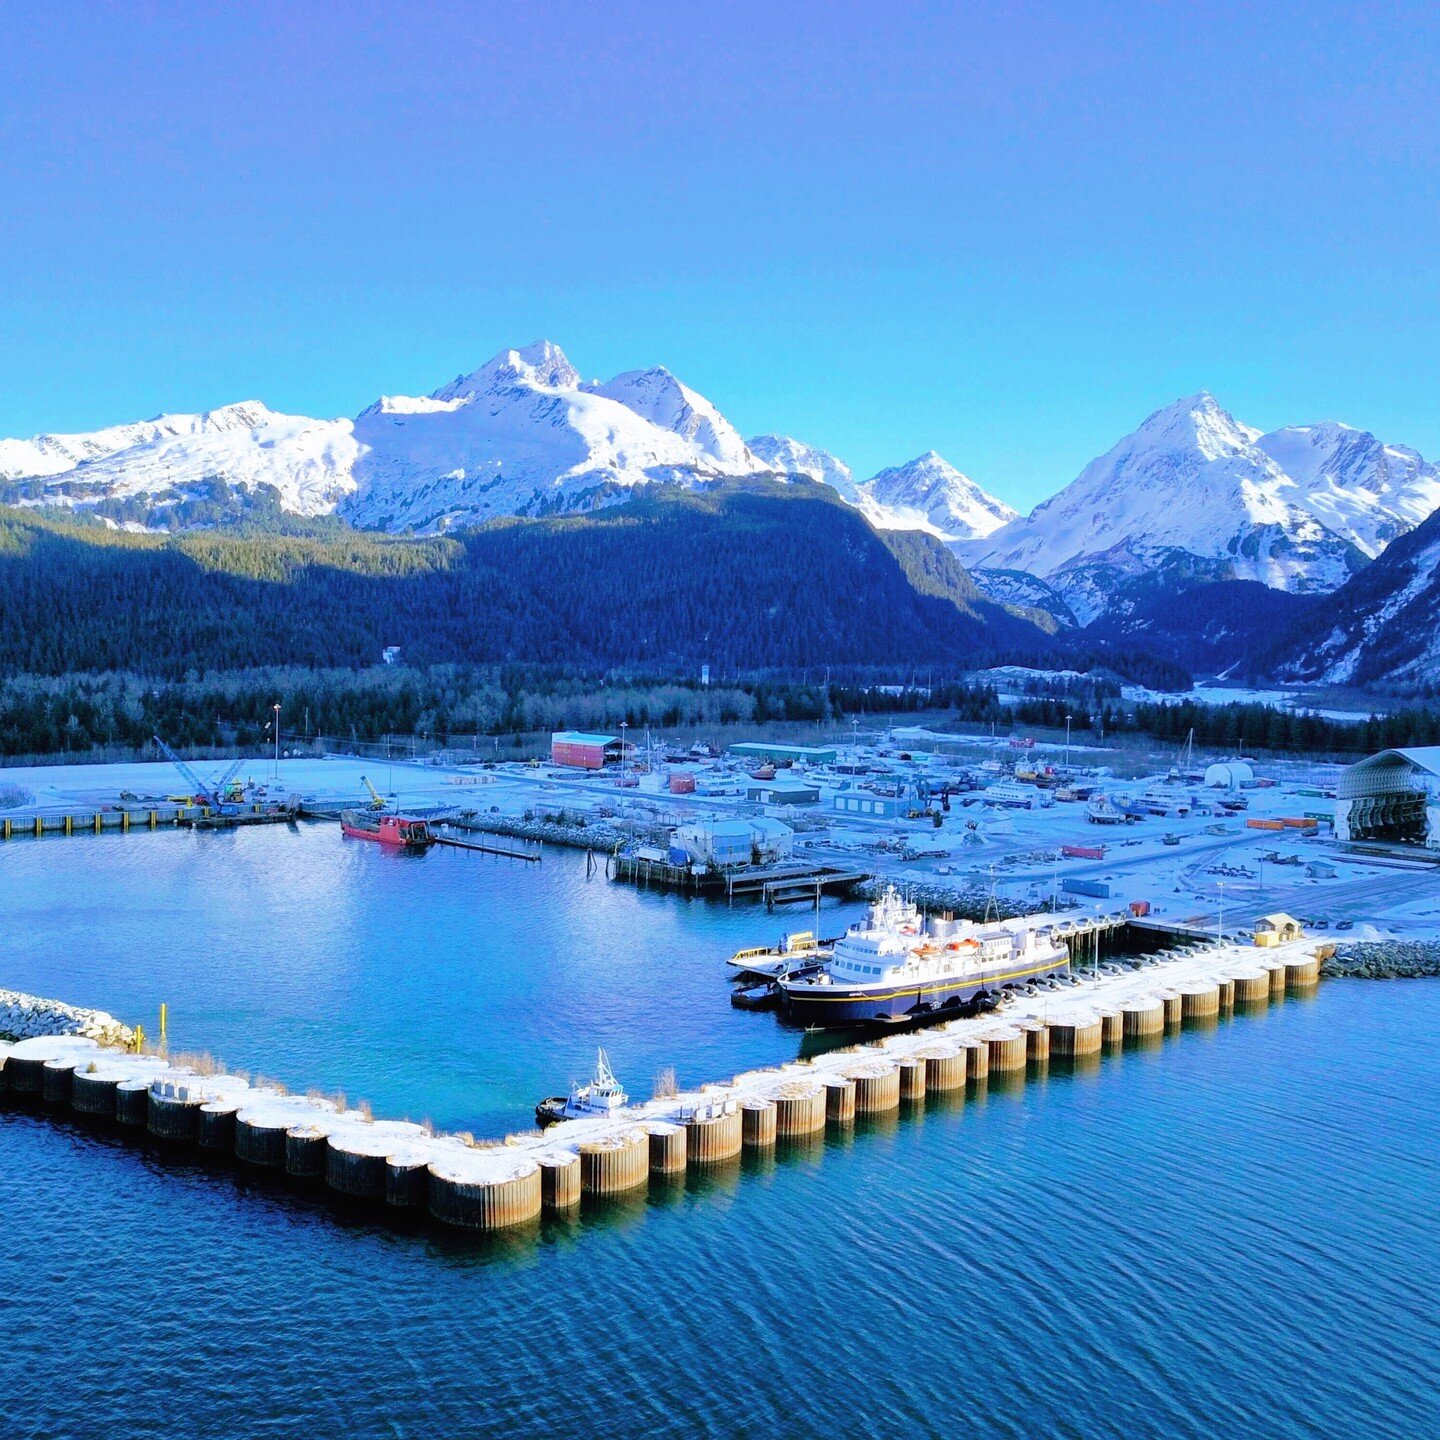 We are excited to announce our new seafood processing facility in Seward, Alaska! We are NOW HIRING for General Labor for the 2022 season which will run from Mid-March through the end of October. This is a thrilling opportunity to live in a beautiful